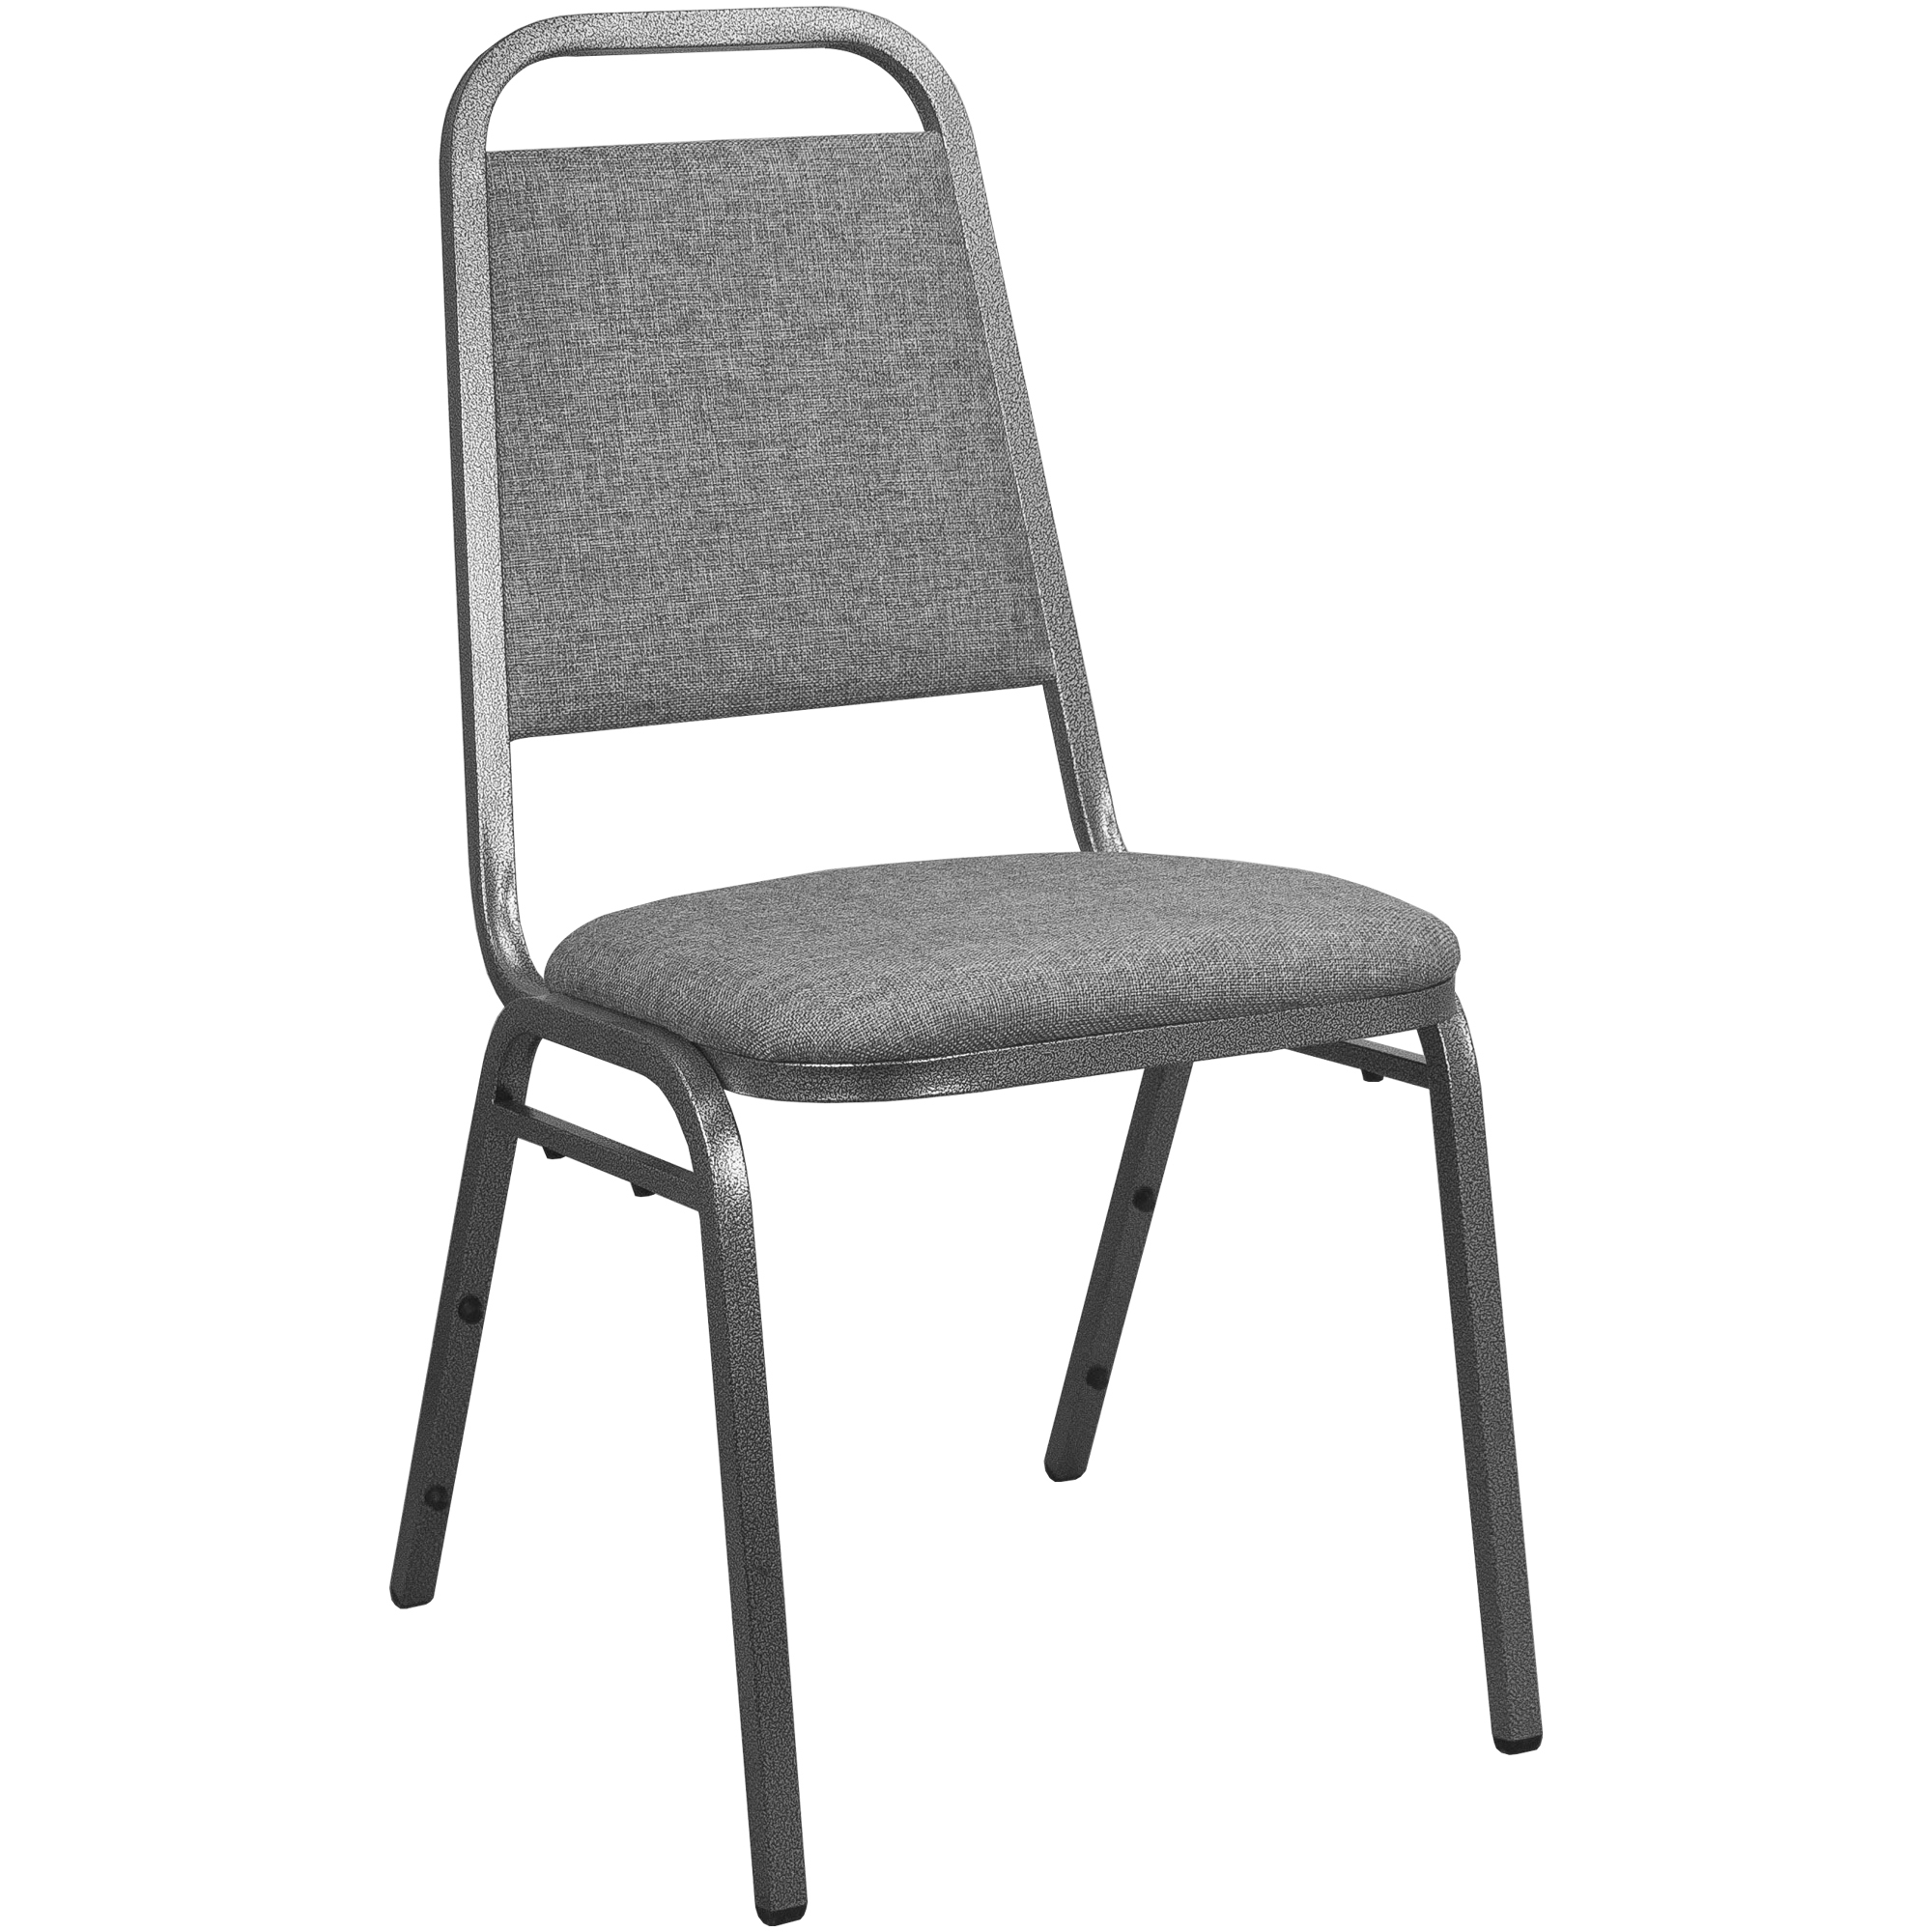 Flash Furniture, Charcoal Gray Fabric-Padded Banquet Stack Chairs, Primary Color Gray, Included (qty.) 1, Model 827FABRICBCGSB